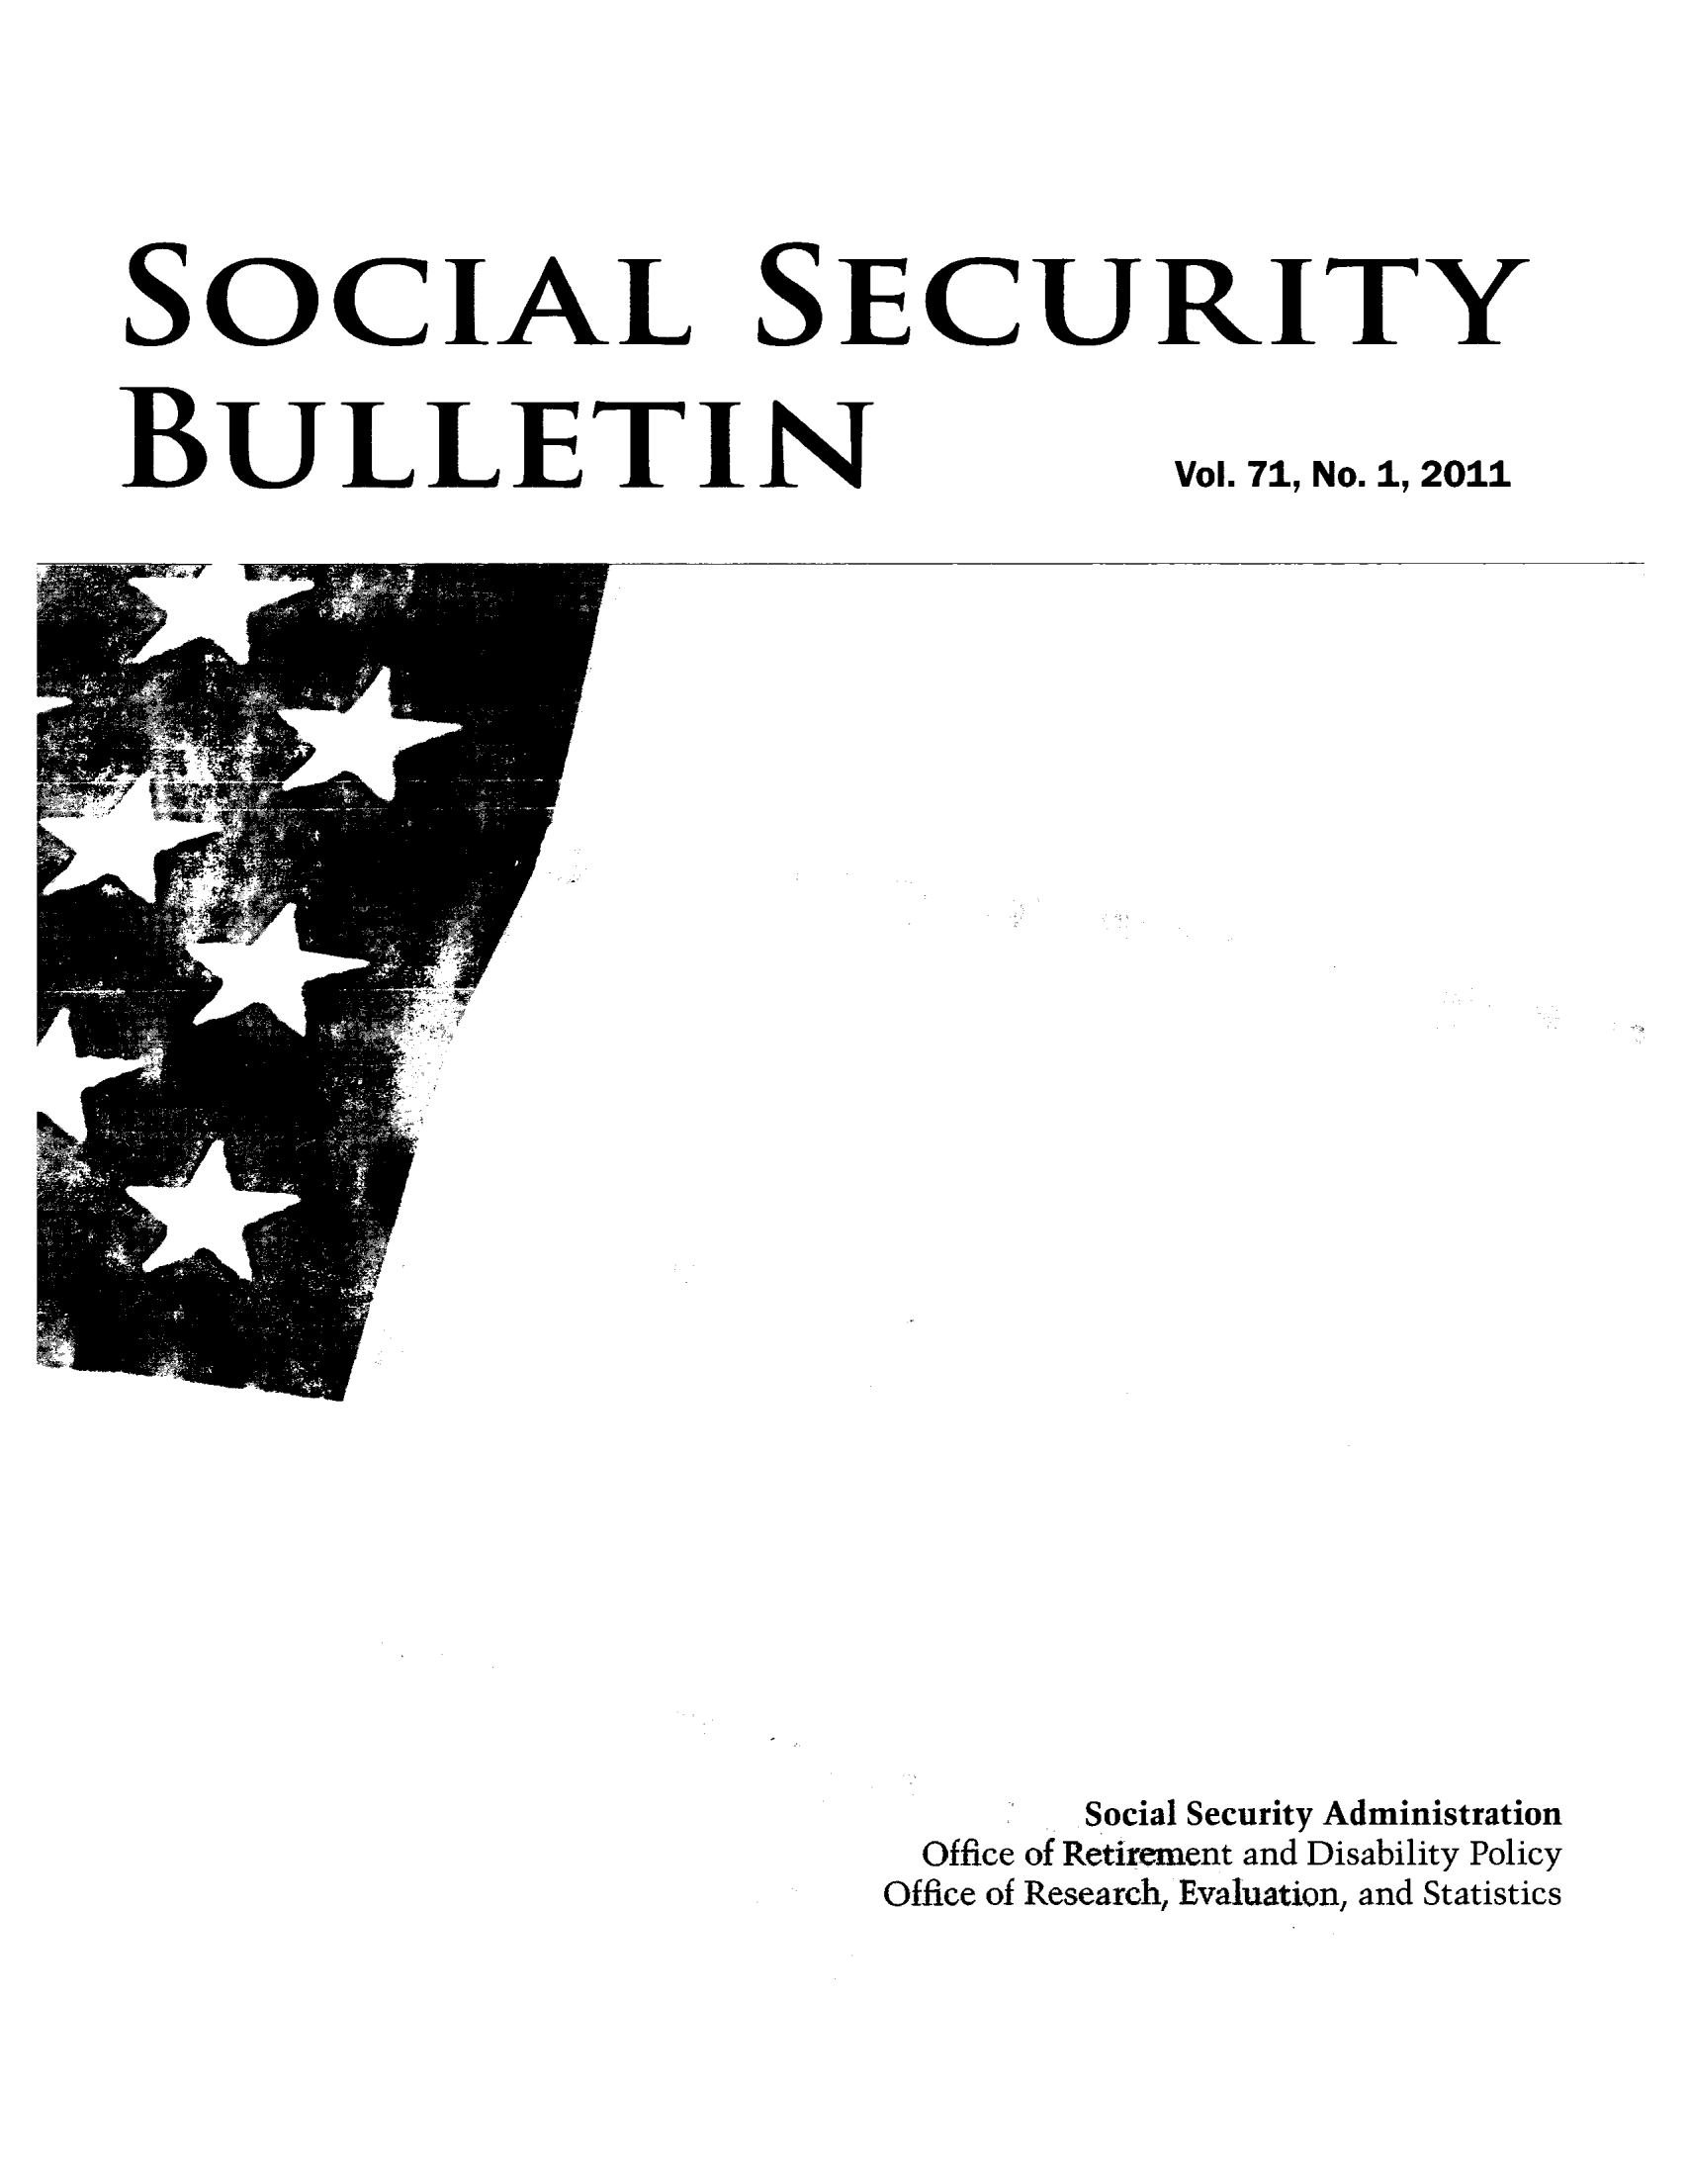 handle is hein.journals/ssbul71 and id is 1 raw text is: SOC IAL SECURITY

BULLETIN

Vol. 71, No.1, 2011

Social Security Administration
Office of Retirement and Disability Policy
Office of Research, Evaluation, and Statistics


